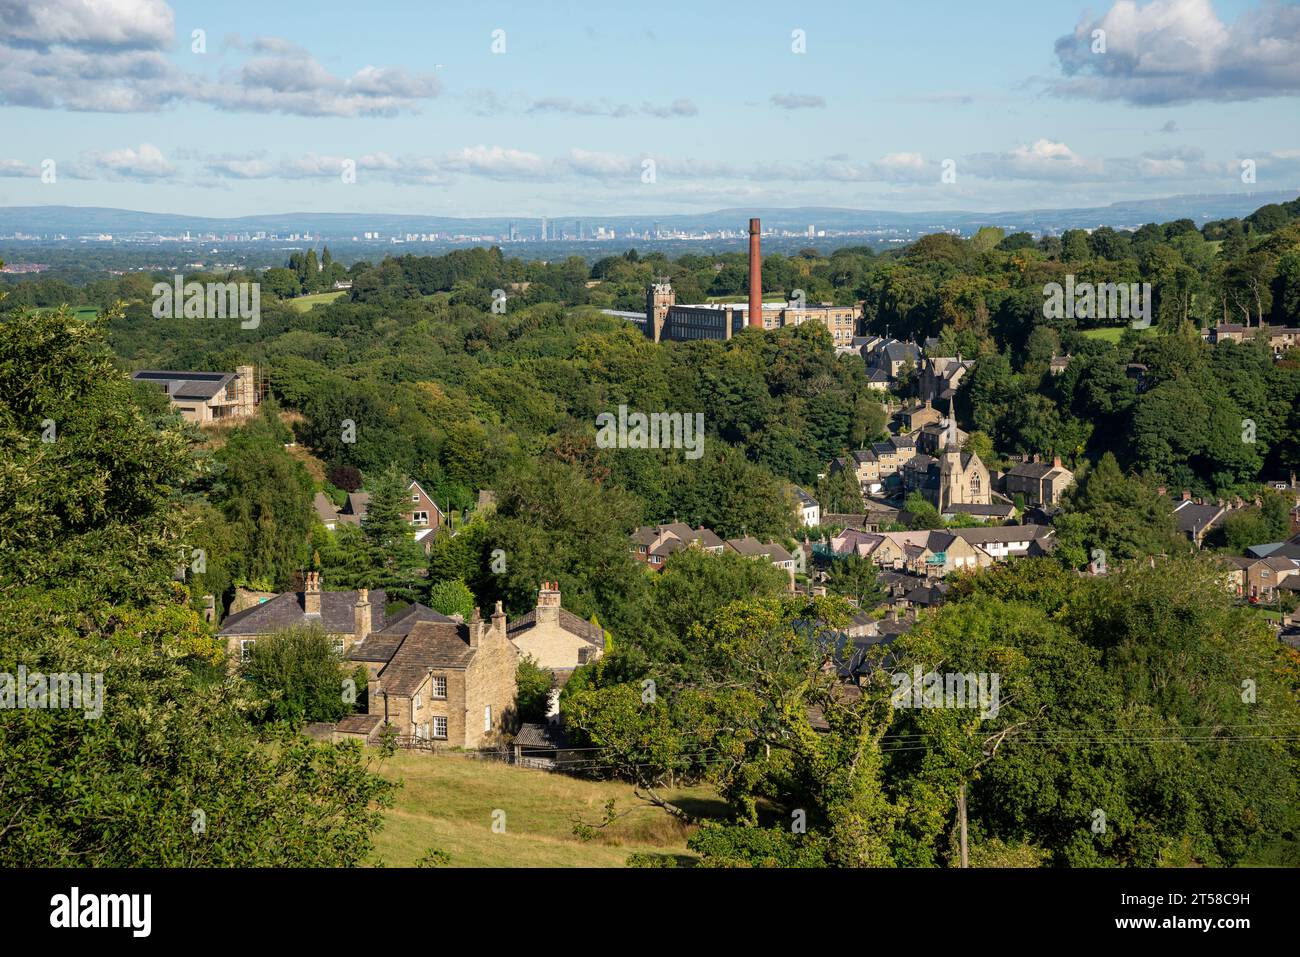 Clarence Mill in Bollington near Macclesfield, Cheshire, England. The city of Manchester in the distance. Stock Photo